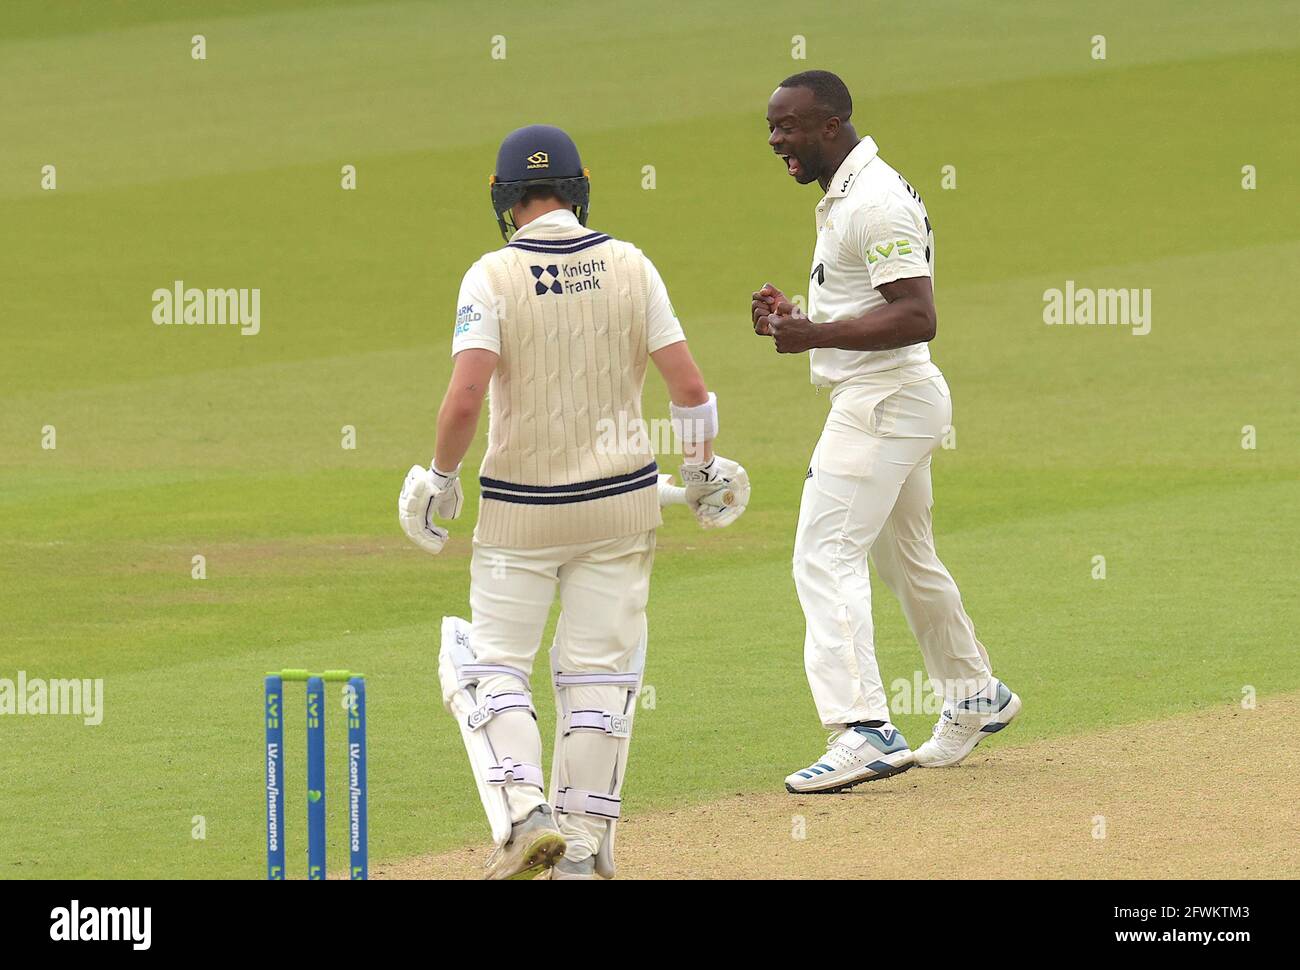 London, UK. 23 May, 2021. London, UK. Surrey’s Kemar Roach celebrates after getting the wicket of Middlesex’s Jack Davies as Surrey take on Middlesex in  the County Championship at the Kia Oval, day four. David Rowe/Alamy Live News Stock Photo